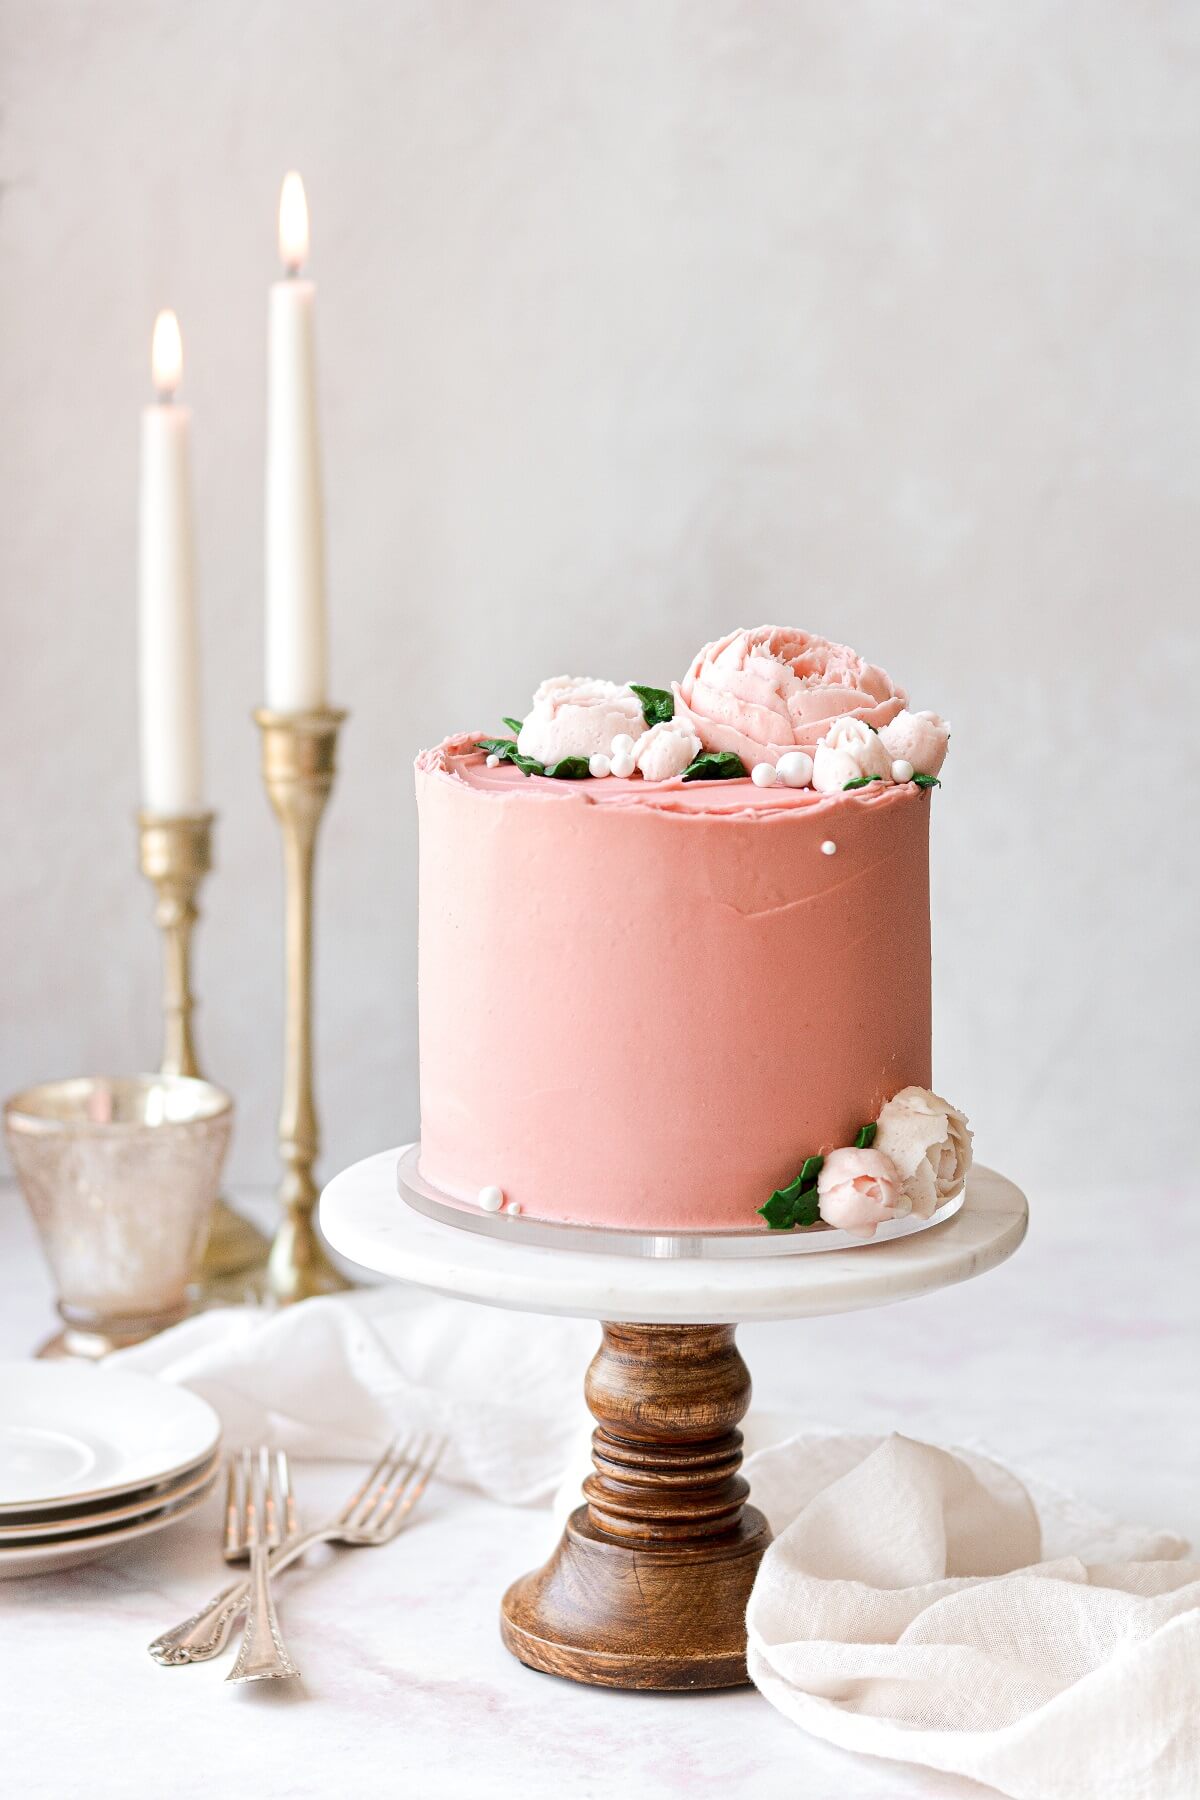 A pink frosted cake with buttercream flowers, on a wood and marble cake stand.